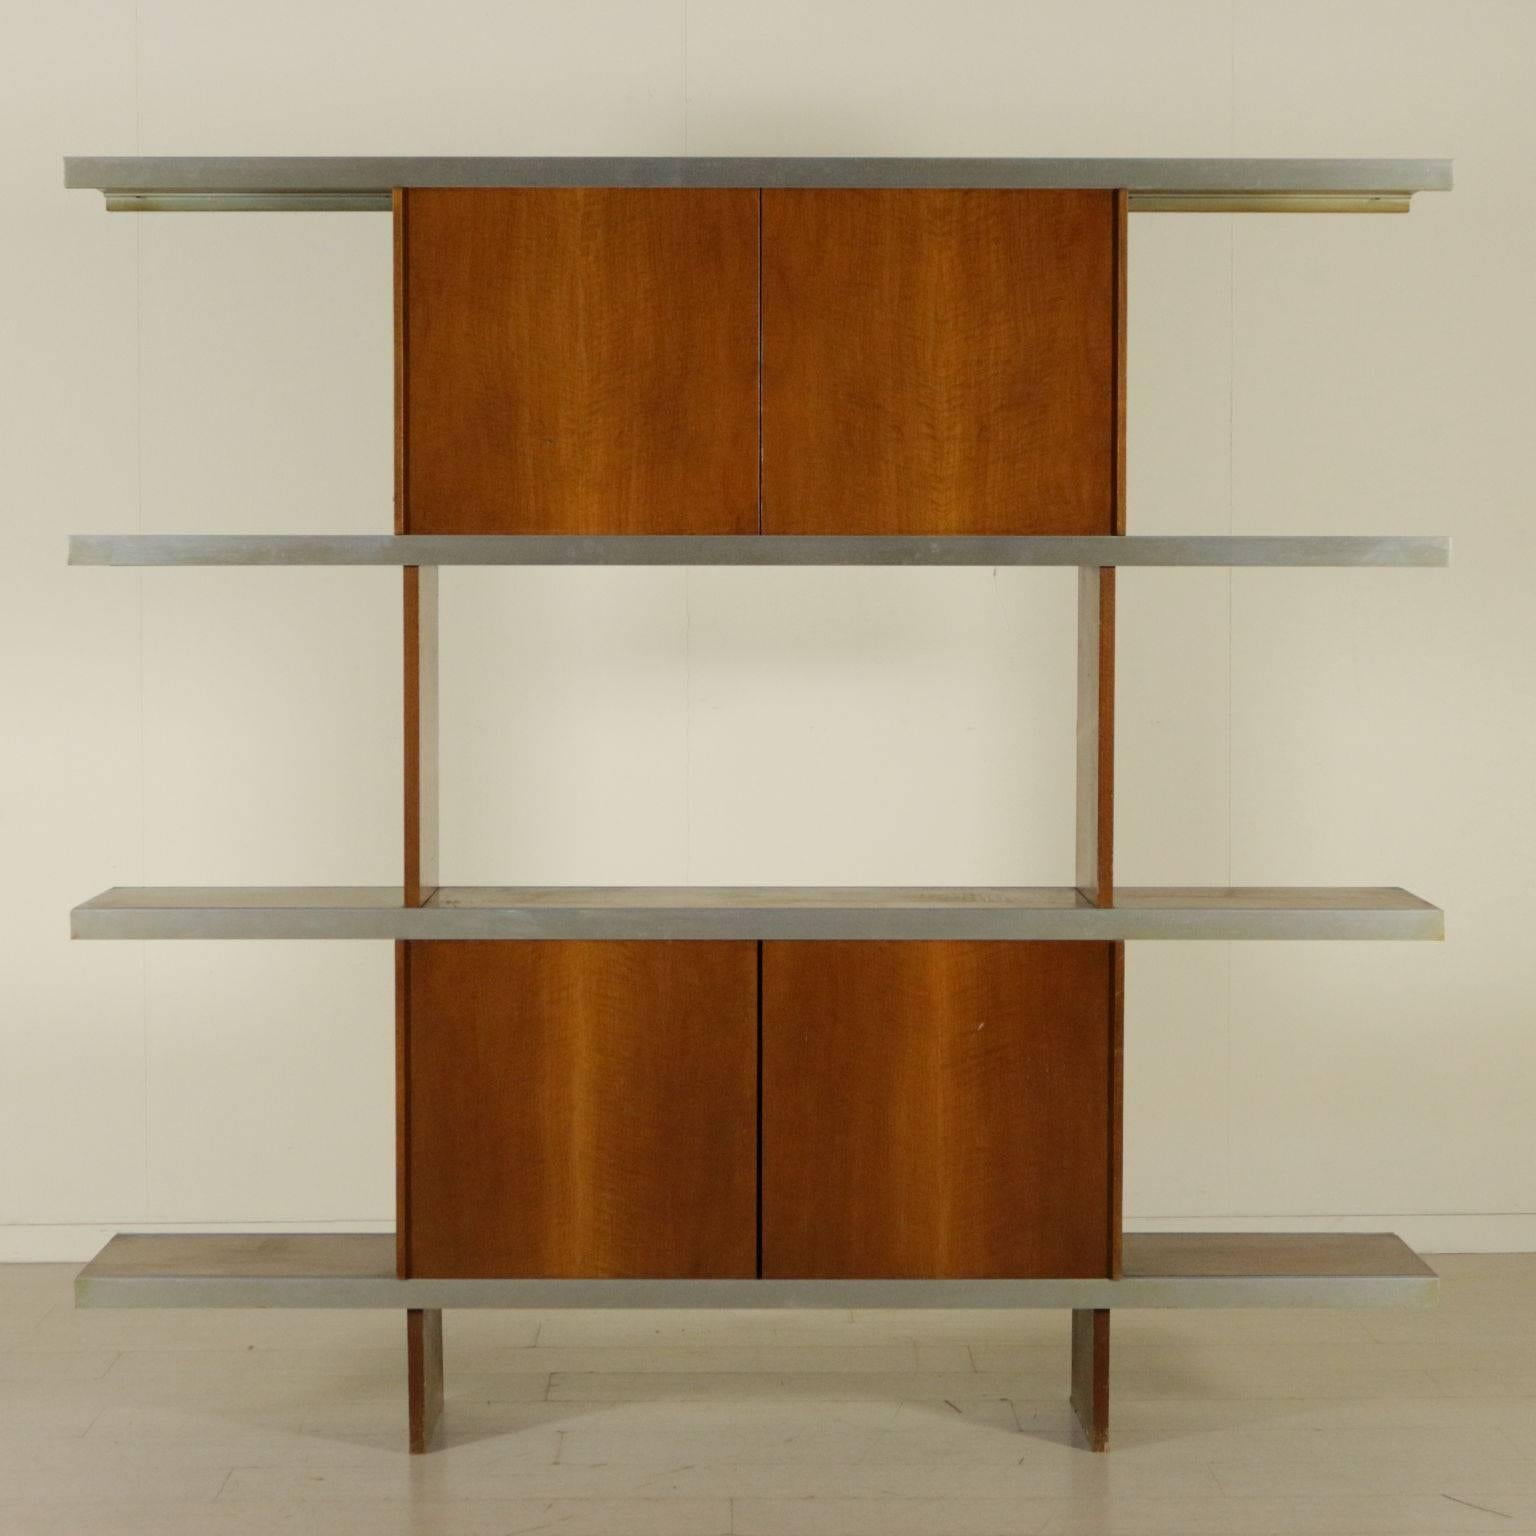 A bookcase with sliding doors on aluminium rails. Designed by Angelo Mangiarotti (1921-2012) for Poltronova in 1965. Model: Multi-use. Tanganika walnut veneer. Manufactured in Italy, 1970s.